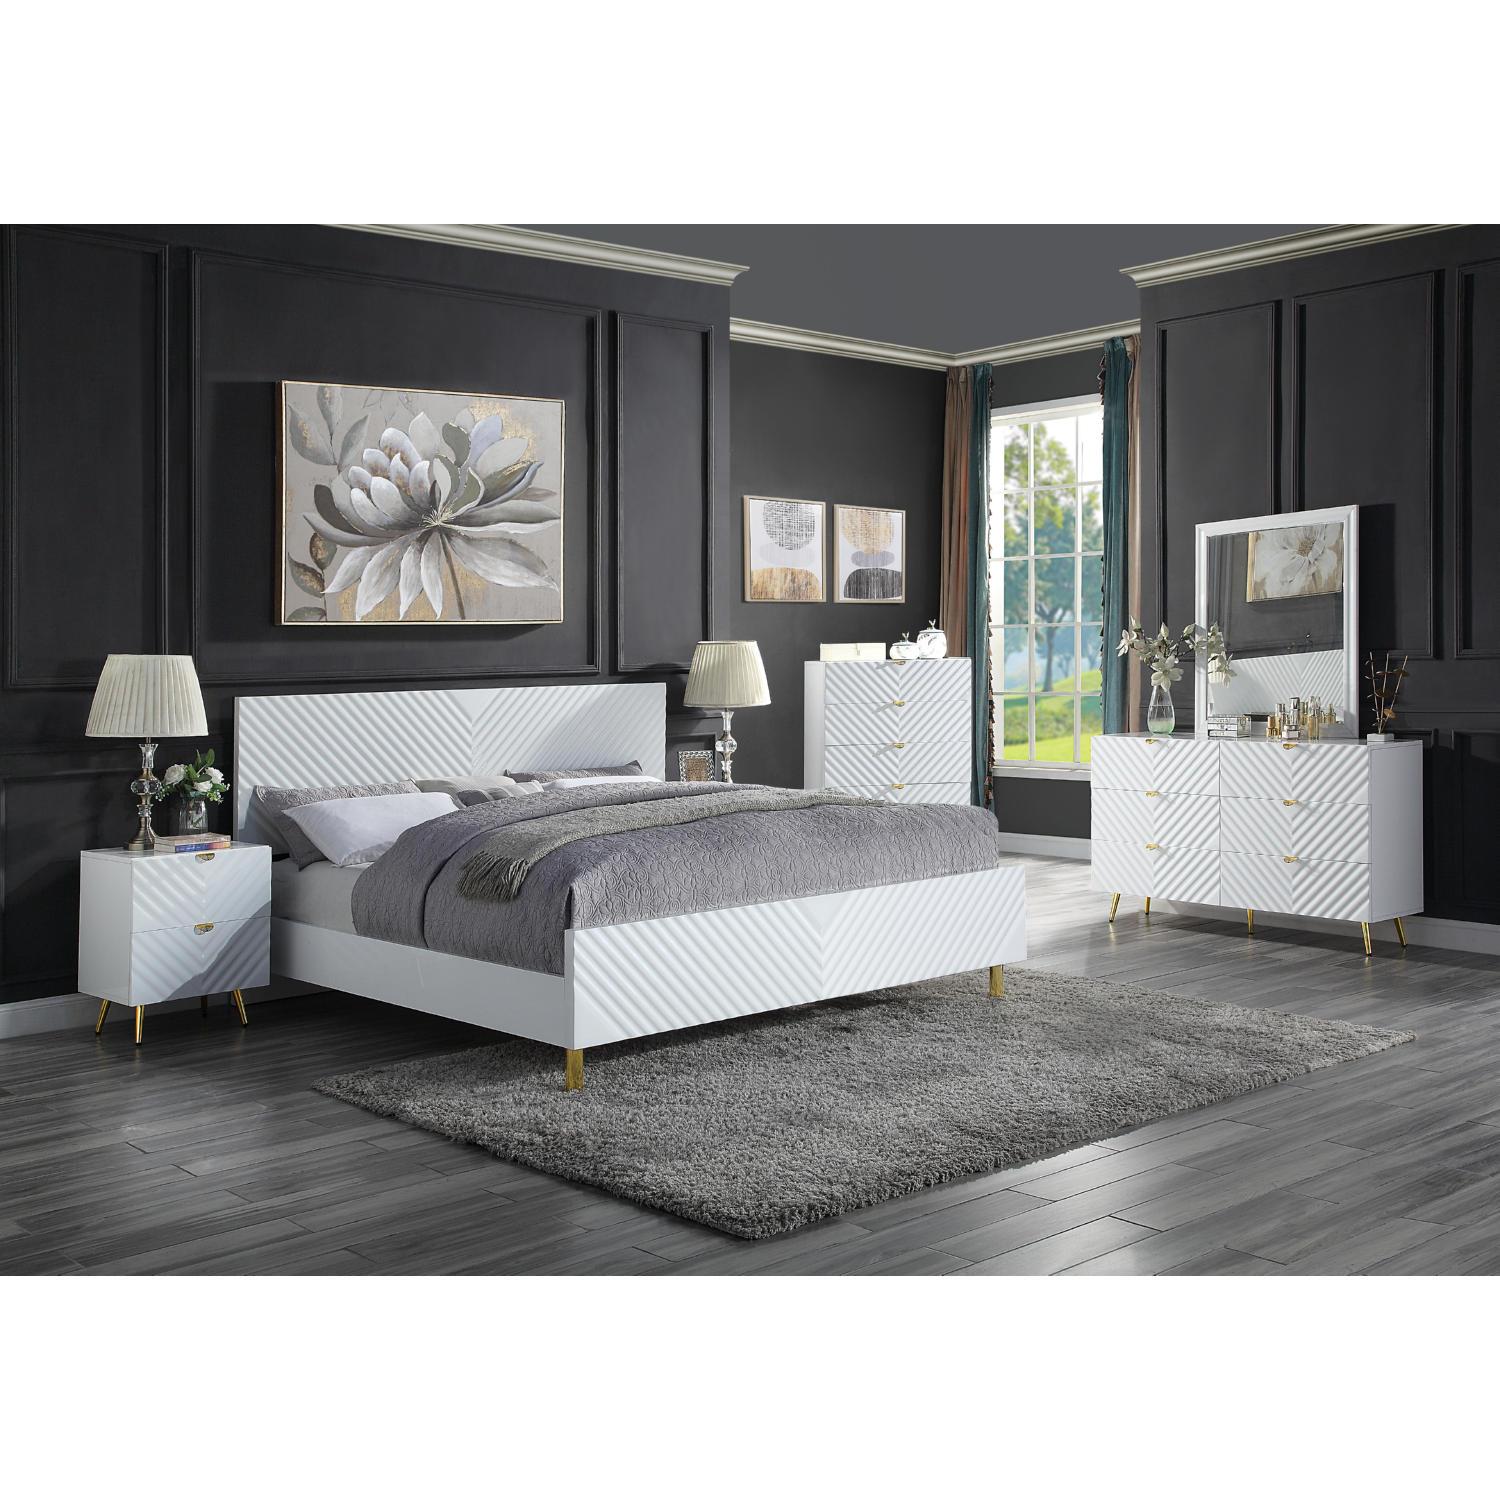 Modern, Casual Bedroom Set Gaines BD01034Q-6pcs in White 